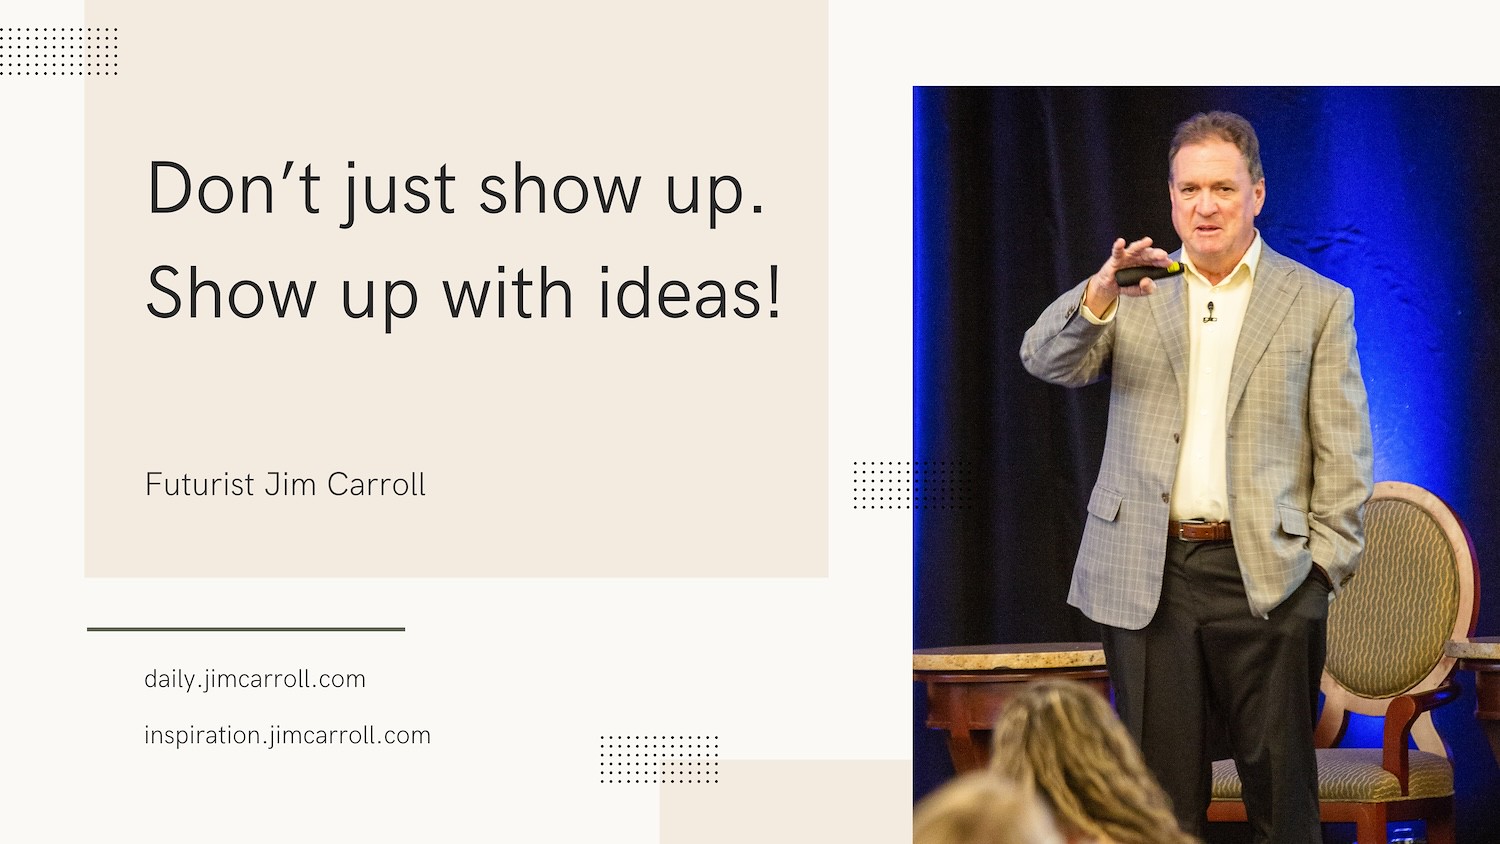 "Don’t just show up. Show up with ideas!" - Futurist Jim Carroll